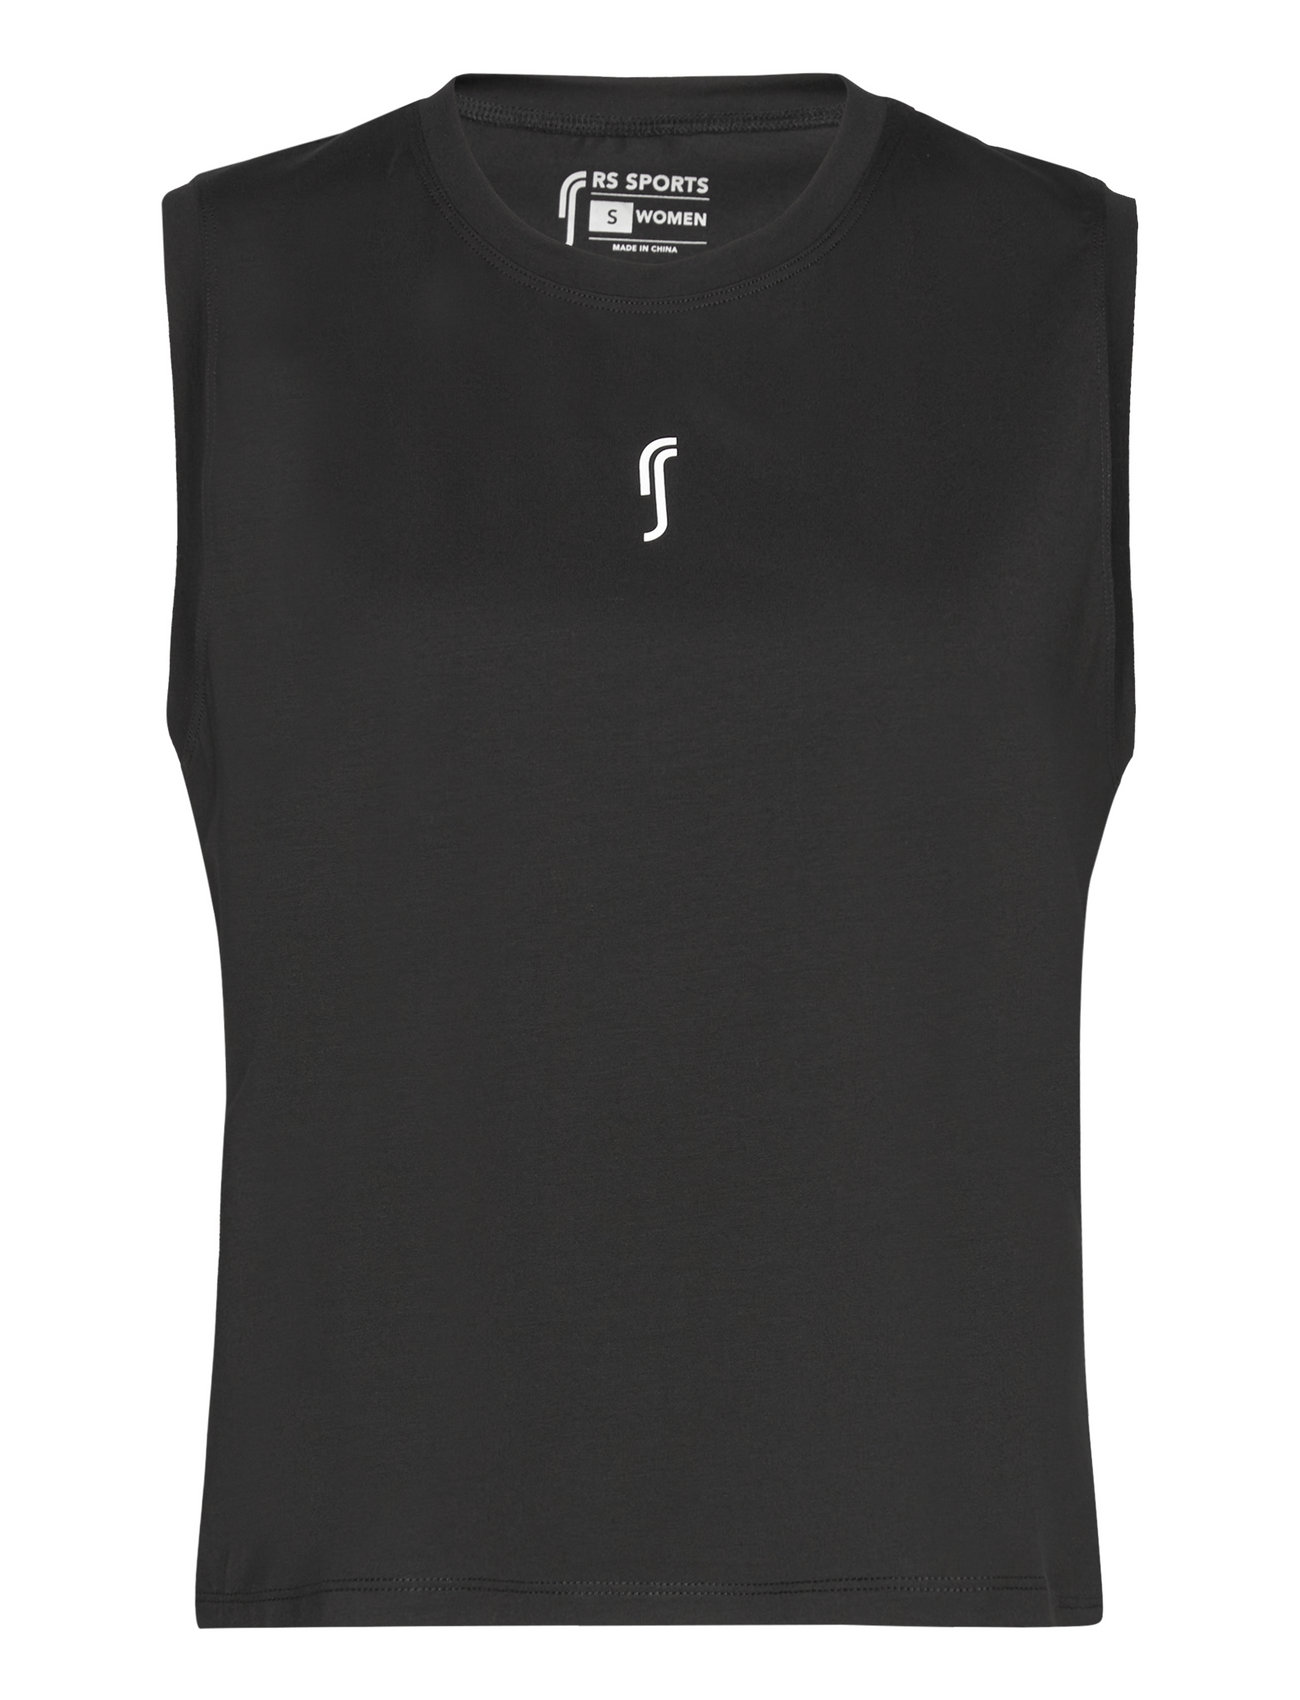 Women’s Relaxed Tank Top Sport T-shirts & Tops Sleeveless Black RS Sports